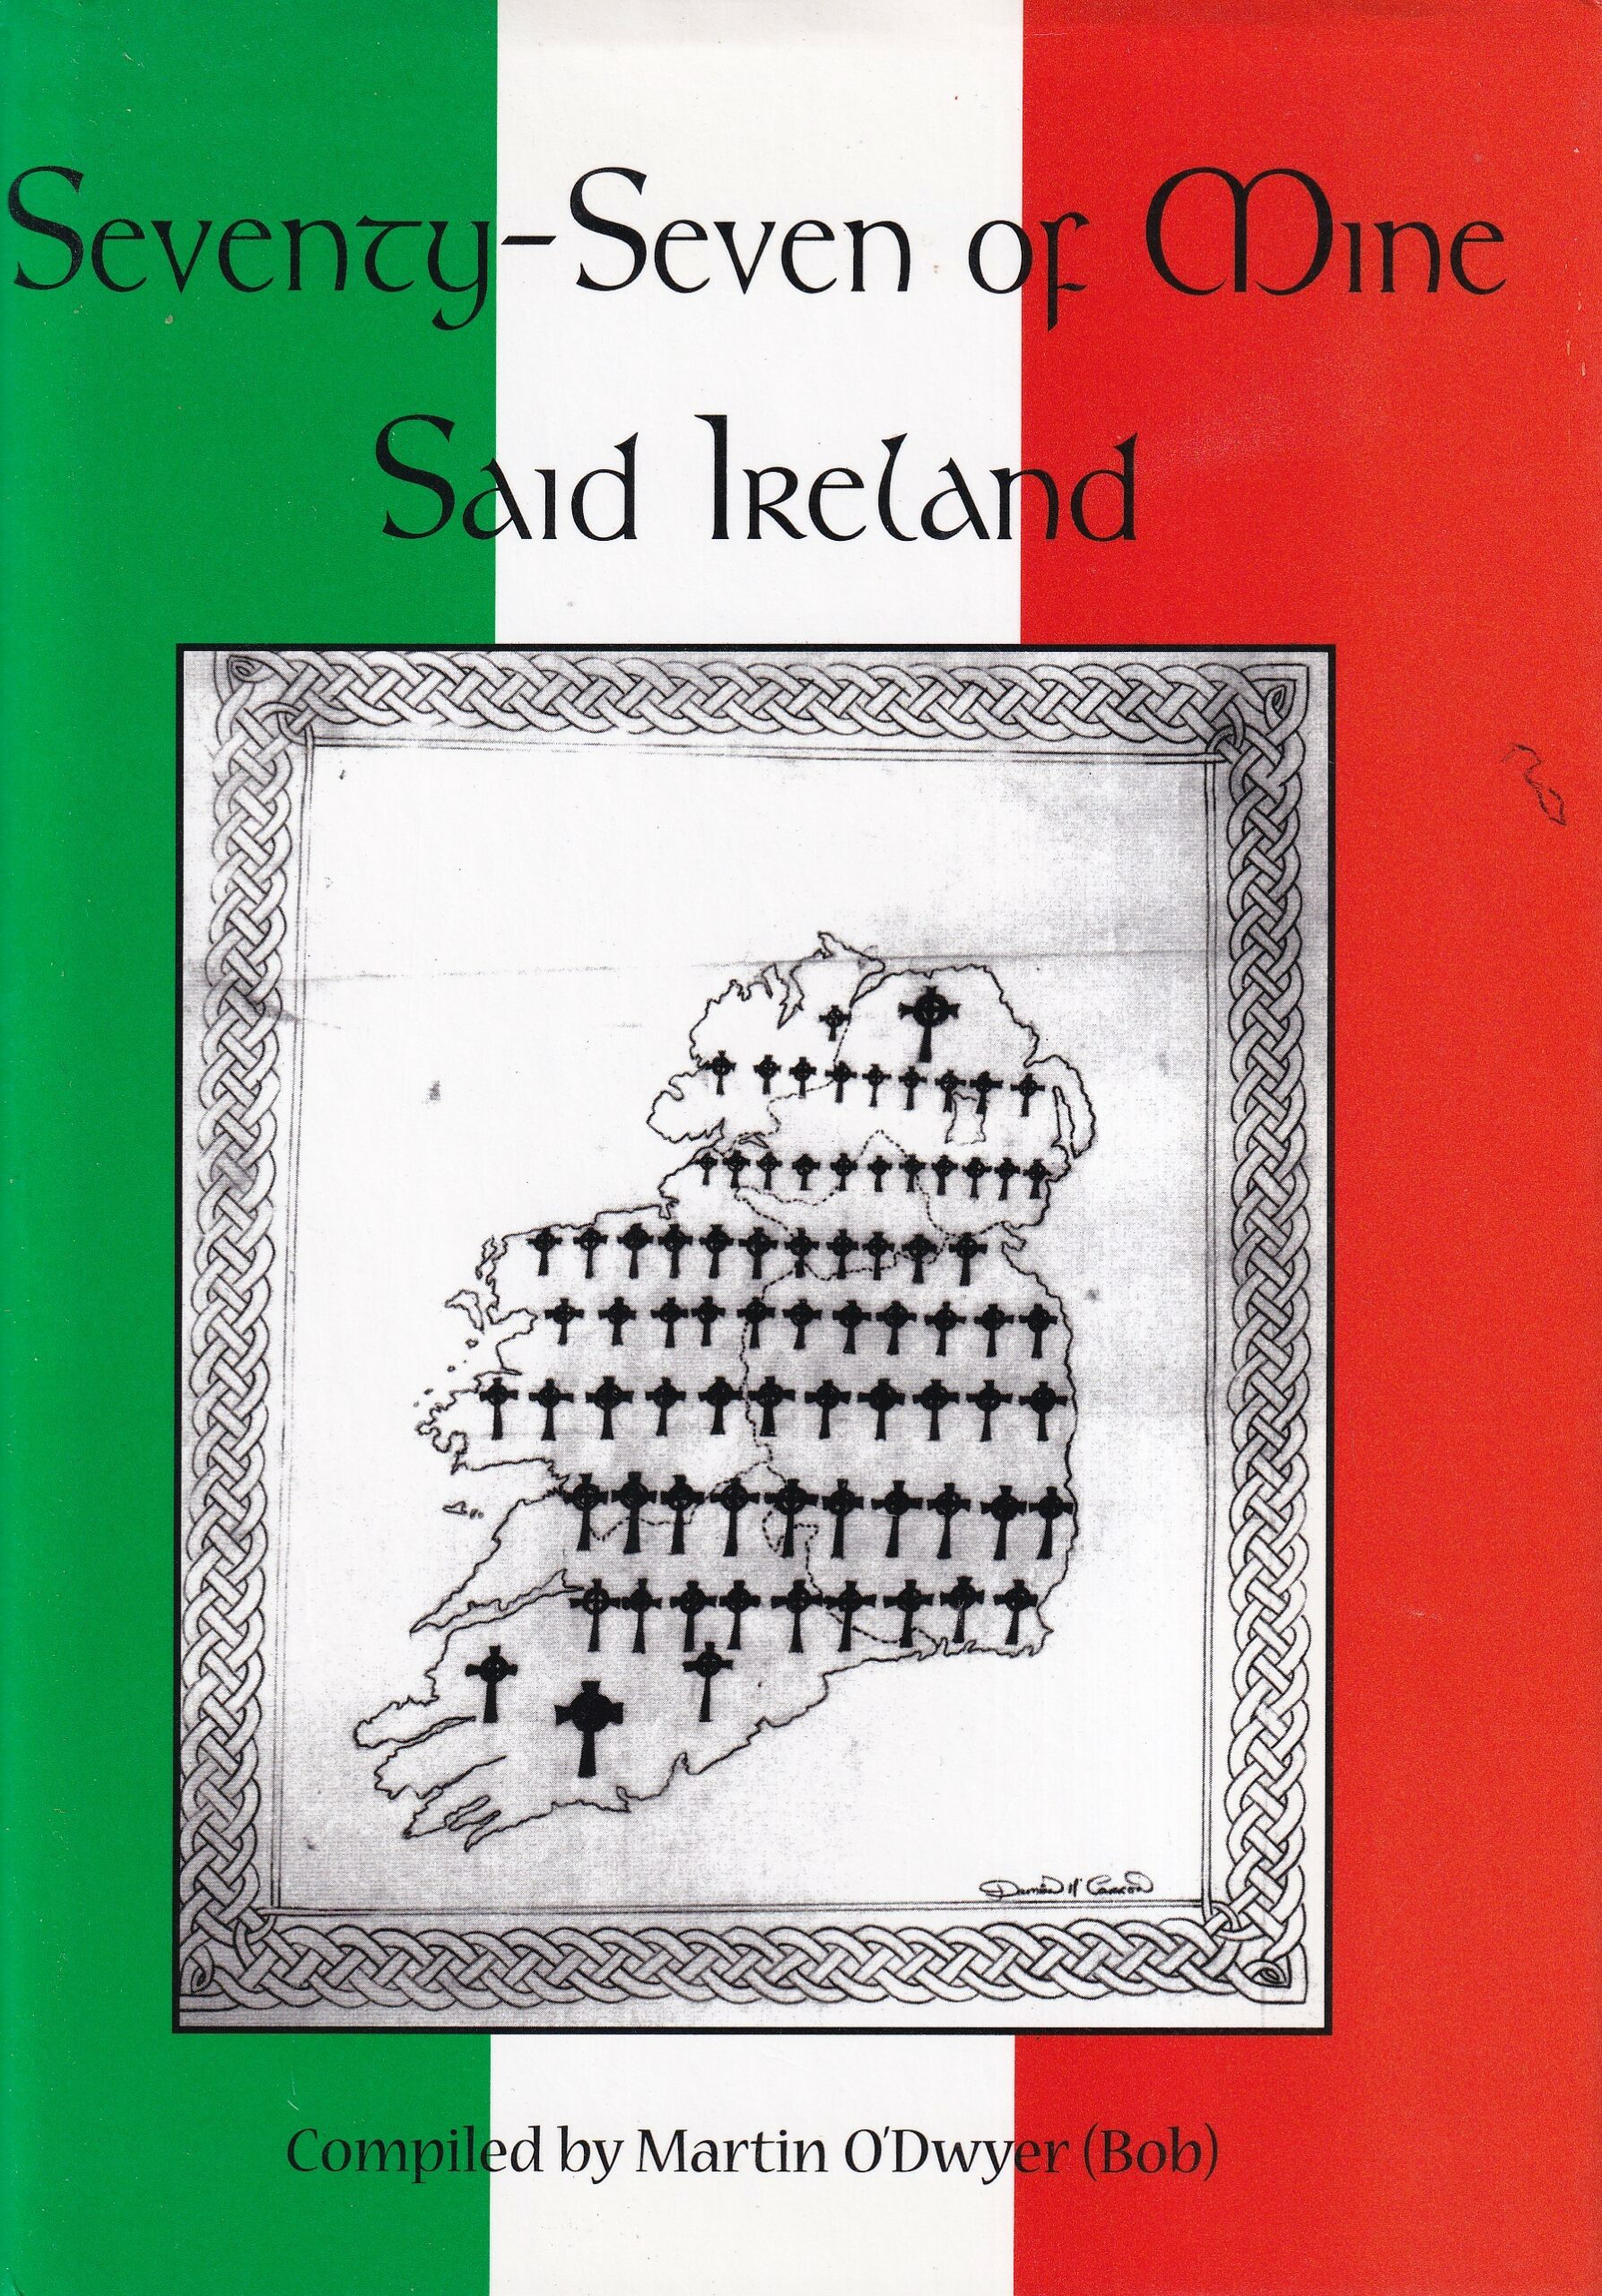 Seventy-Seven of Mine Said Ireland- Signed by Martin O'Dwyer